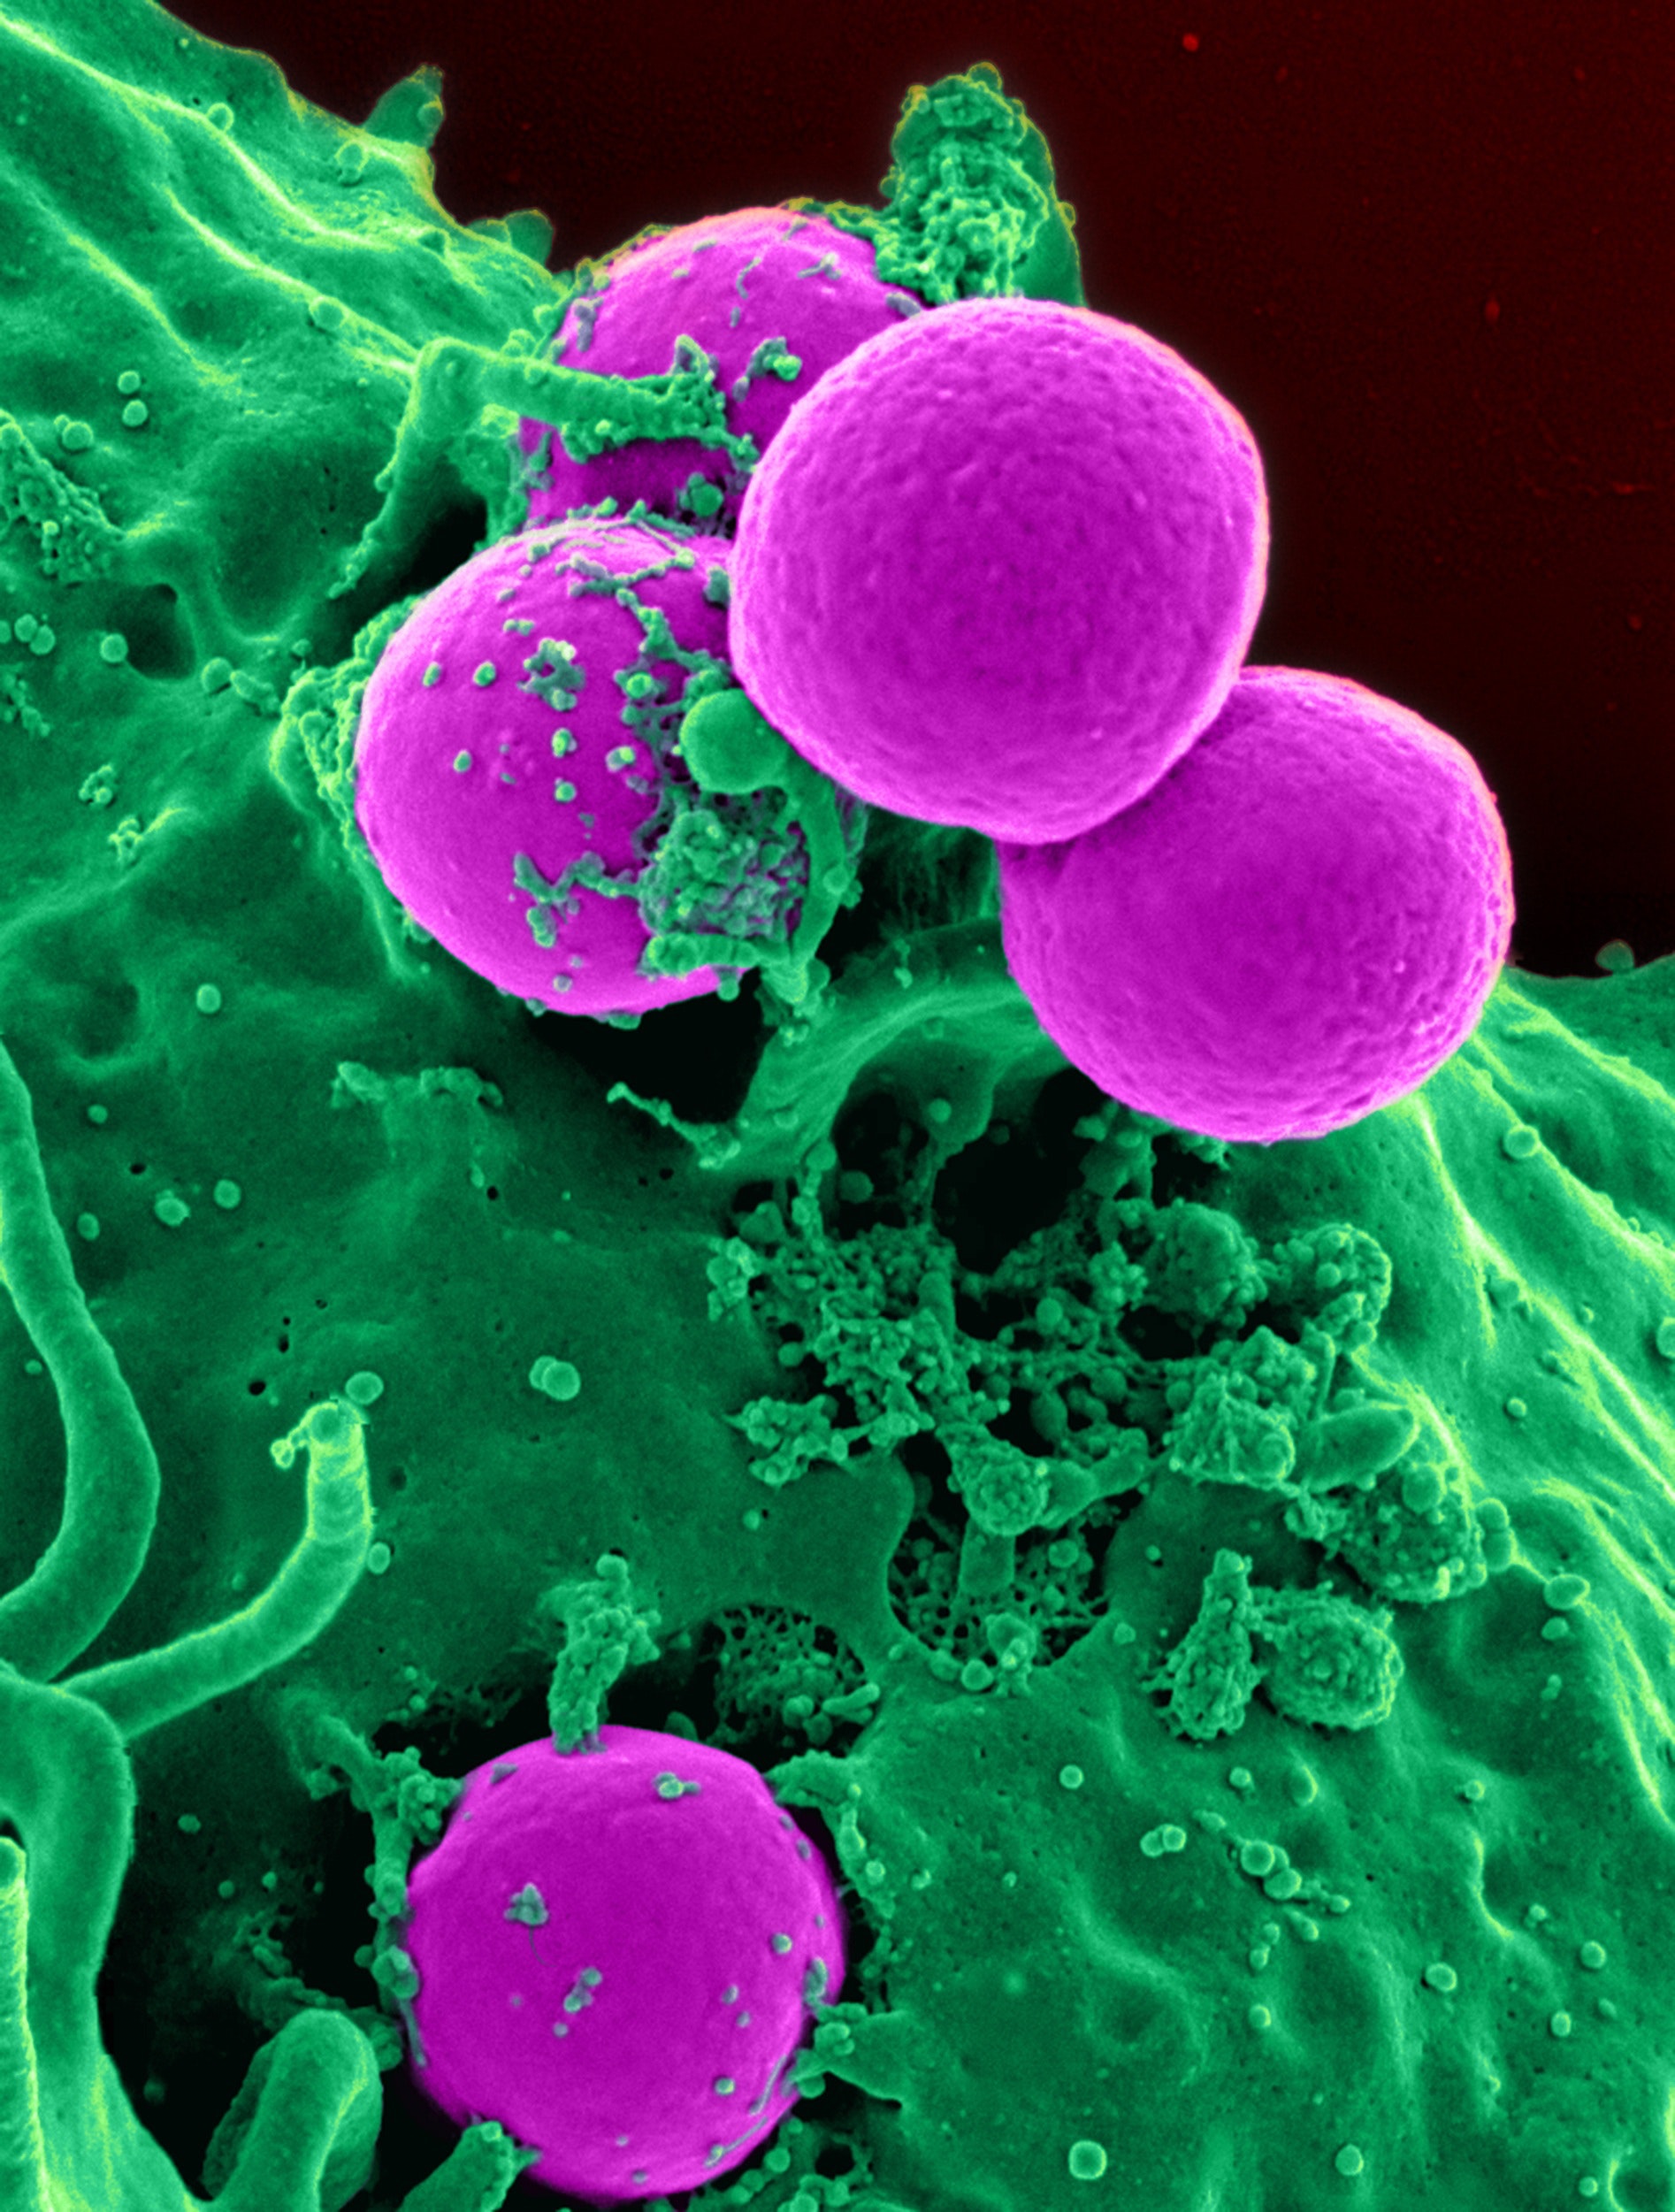 An image of purple cells.